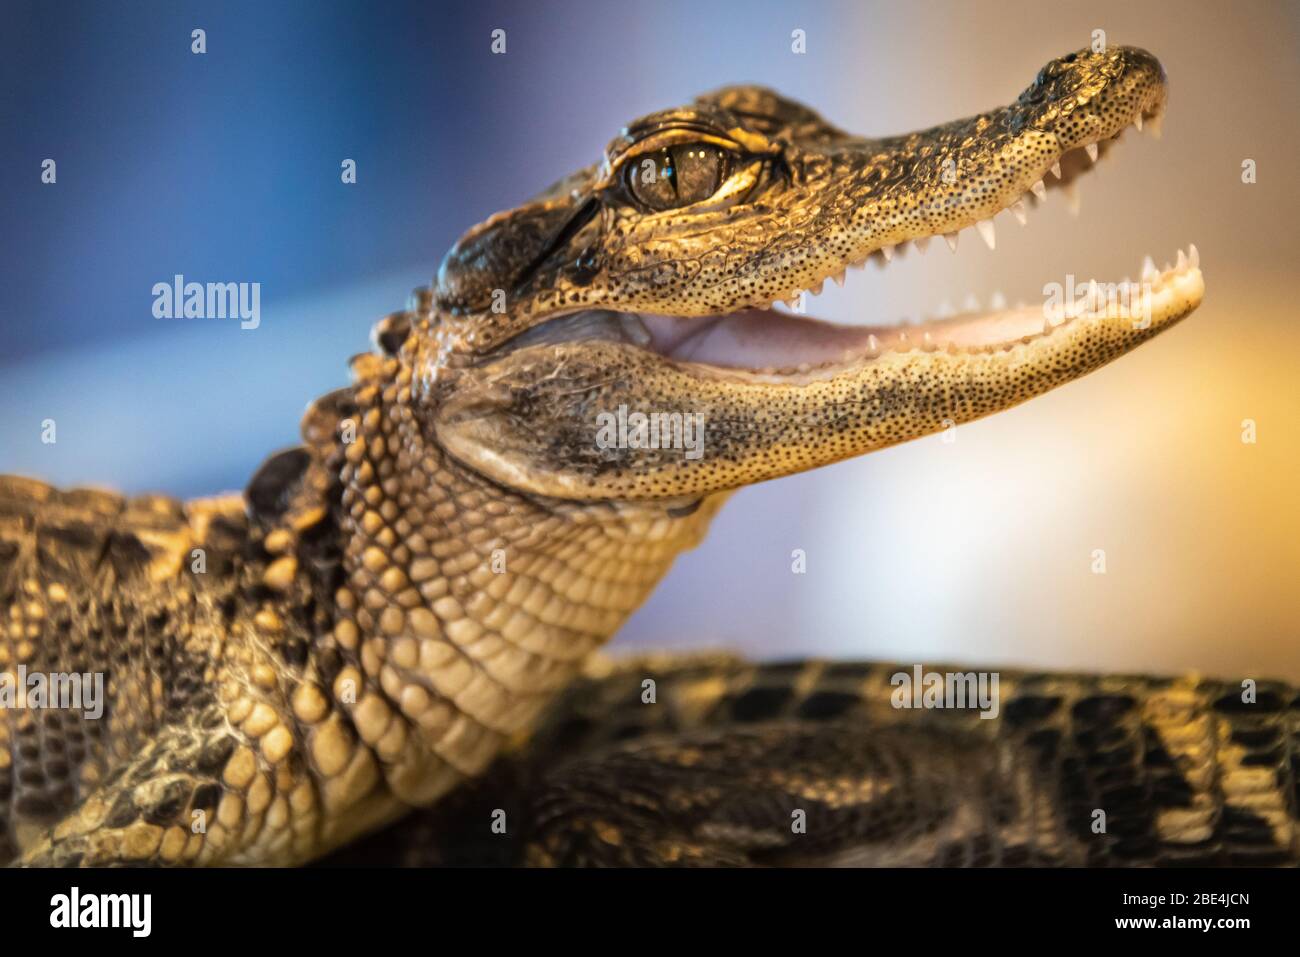 Baby alligator (Alligator mississippiensis) at the GTM Research Reserve Visitor Center in Ponta Vedra Beach, Florida. (USA) Stock Photo